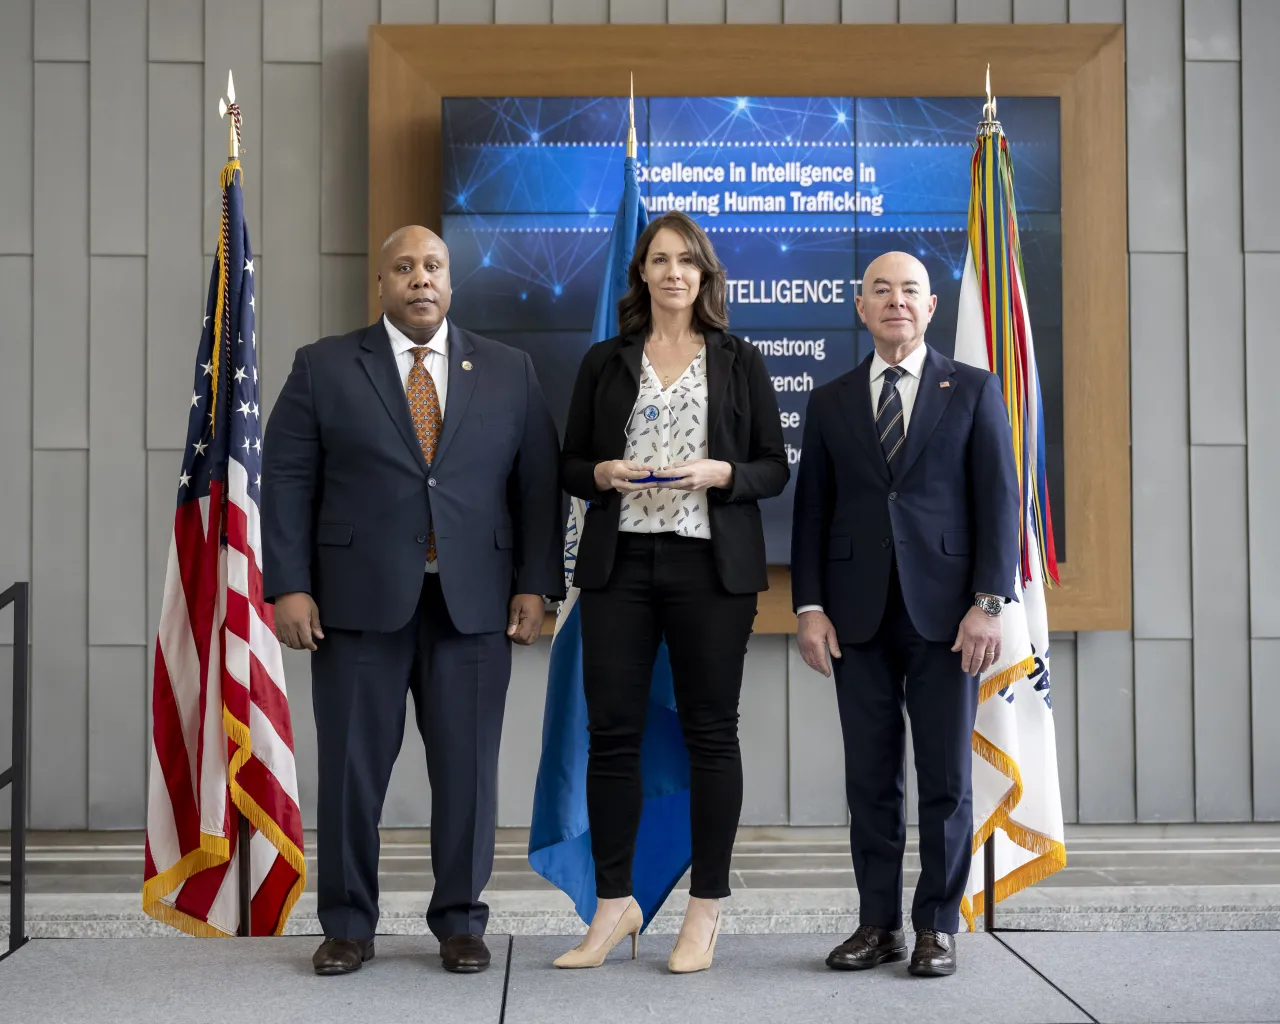 Image: DHS Secretary Alejandro Presents the DHS Annual Awards in Countering Human Trafficking  (017)